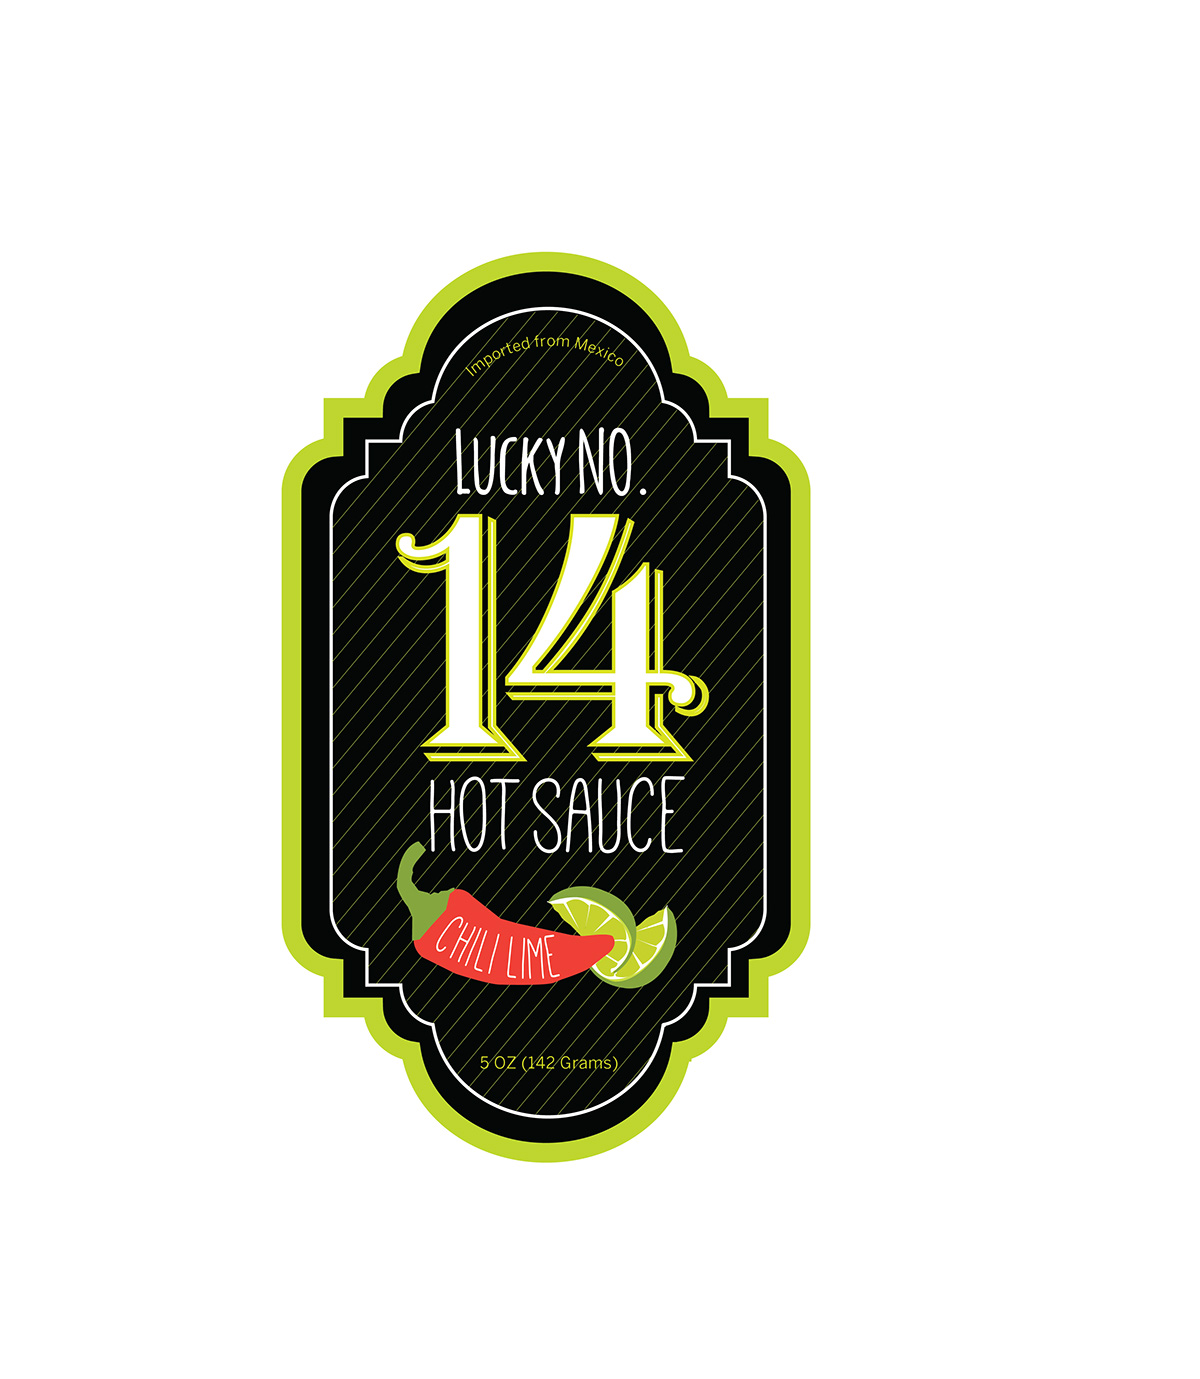 hot sauce Hot sauce chili lime green Label lucky numbers stripes Diecut